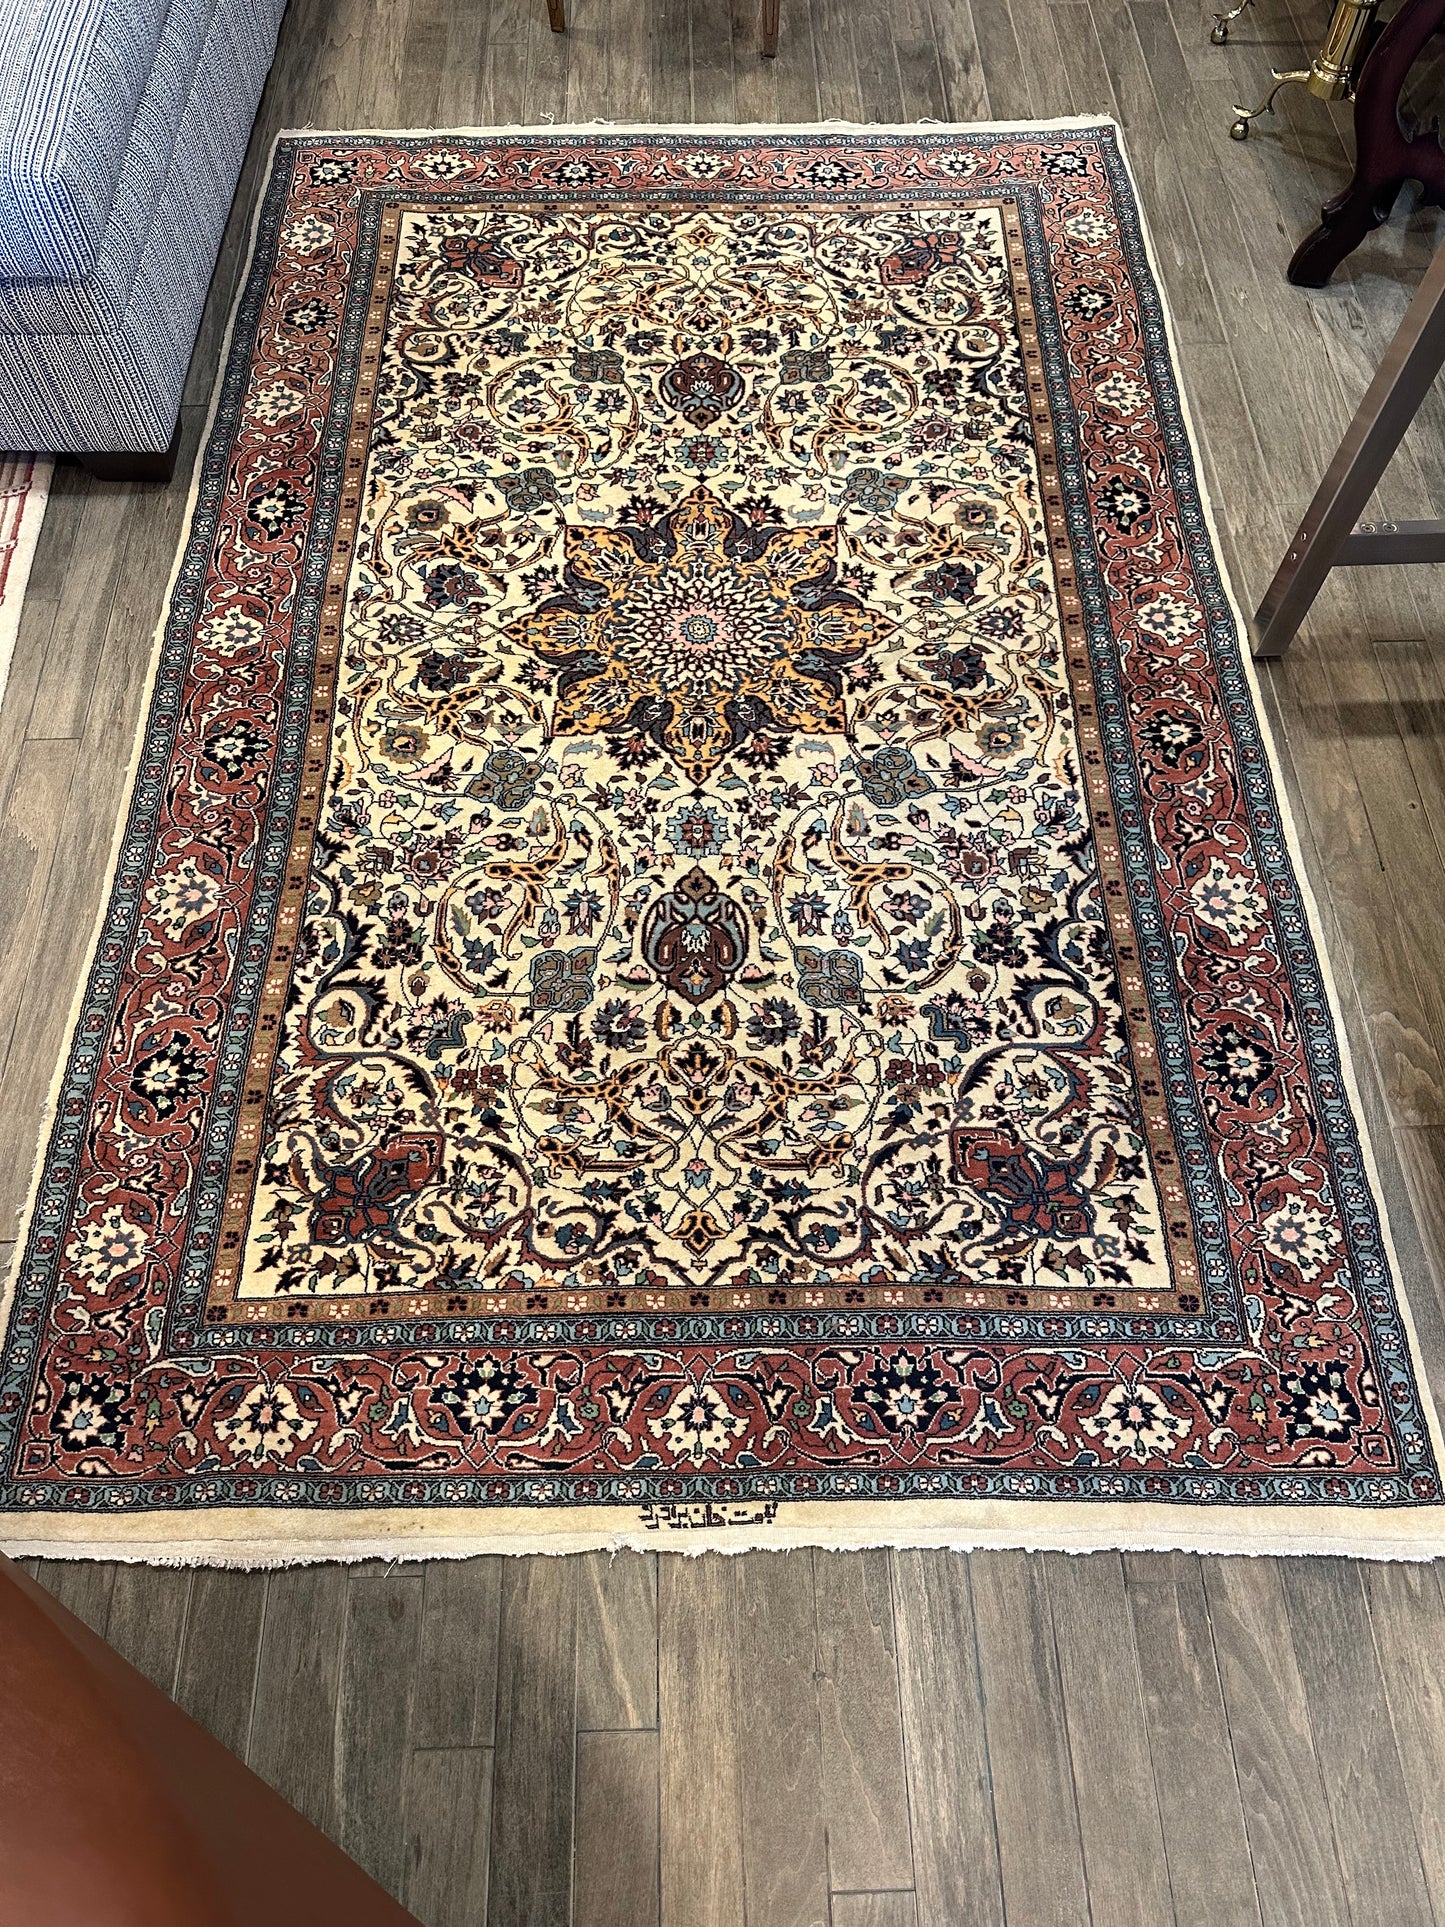 Signed Persian Rug (27179)